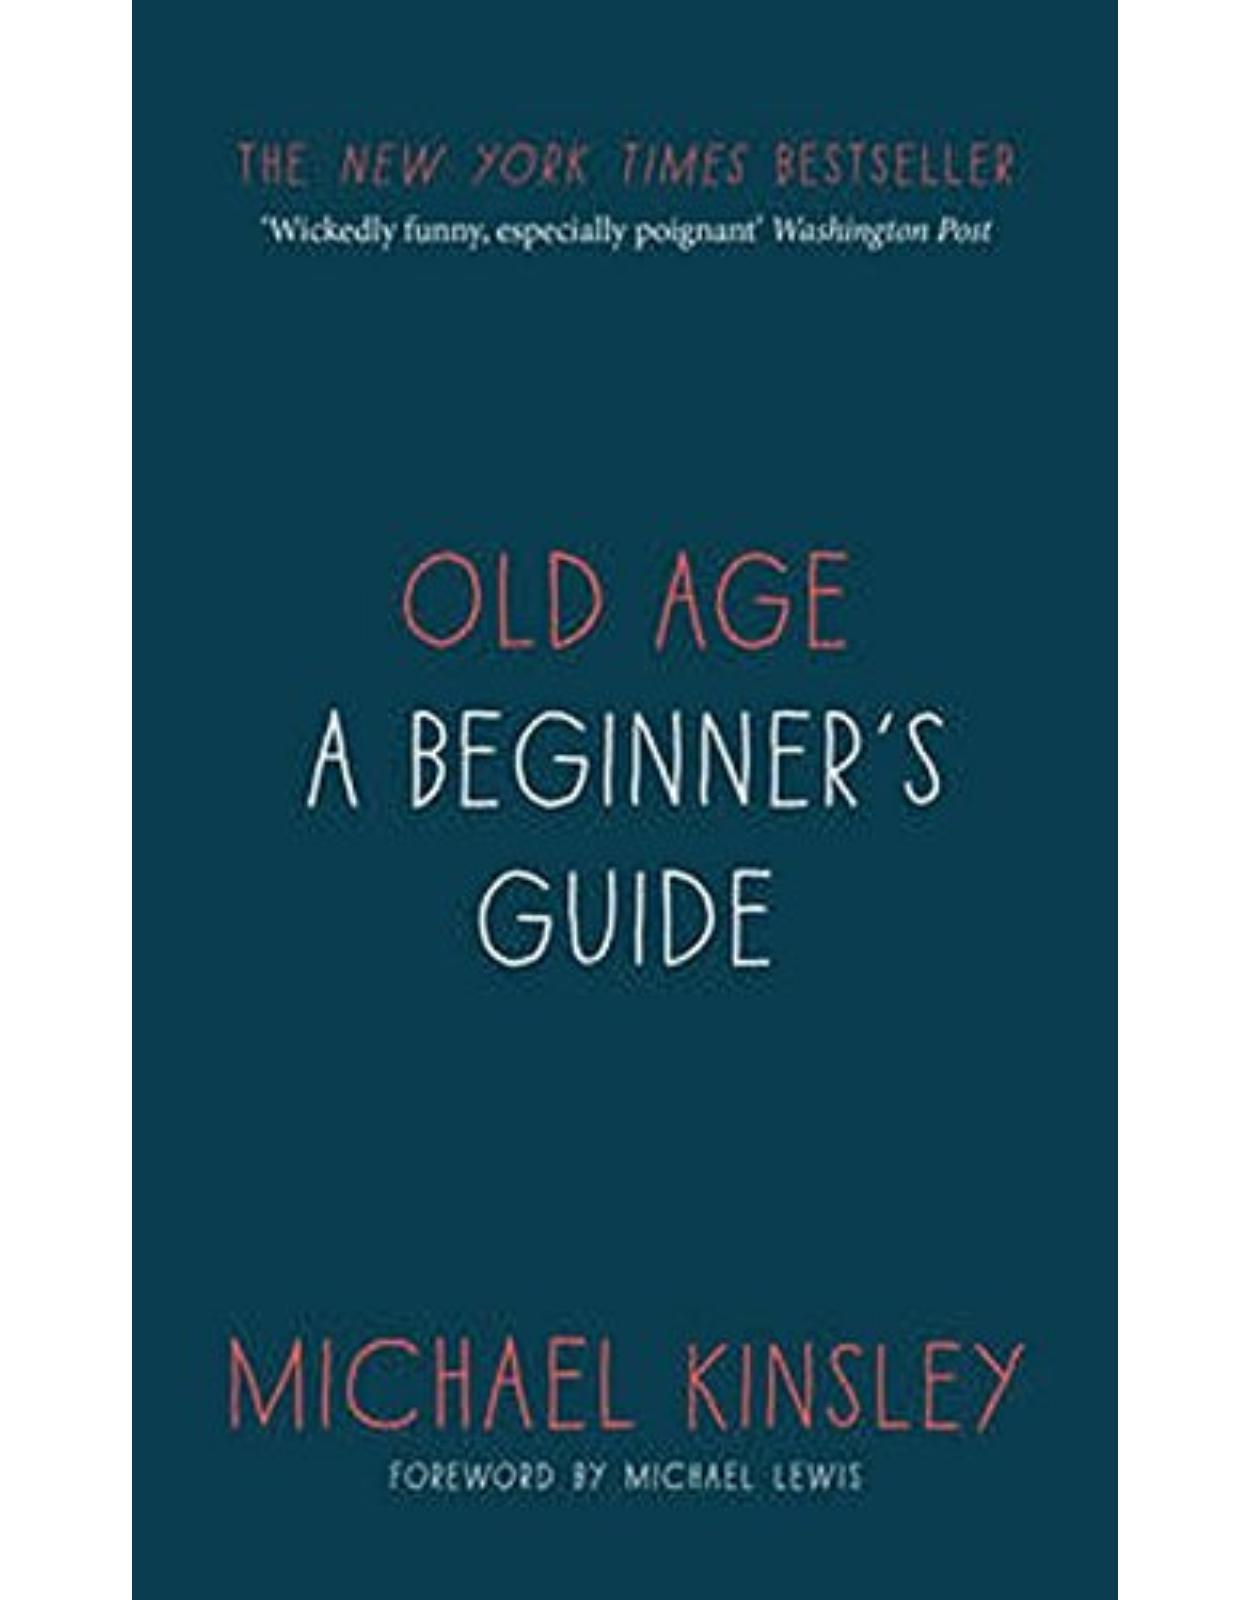 Old Age: A beginner's guide